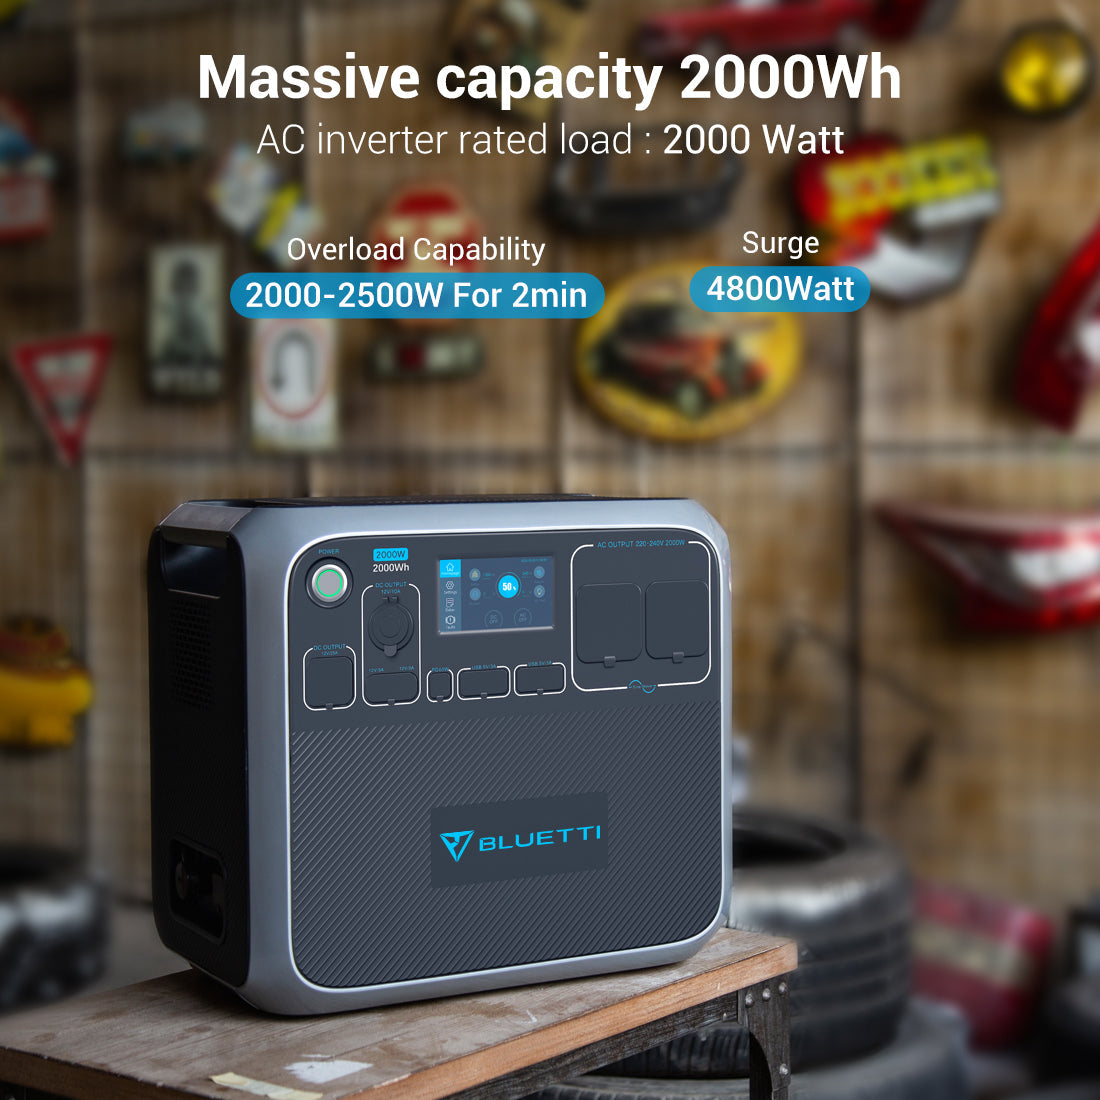 Bluetti Portable Power Station AC200P 2000WH 2000W Solar Genrator for Van Home Emergency Outdoor Camping Explore - Black